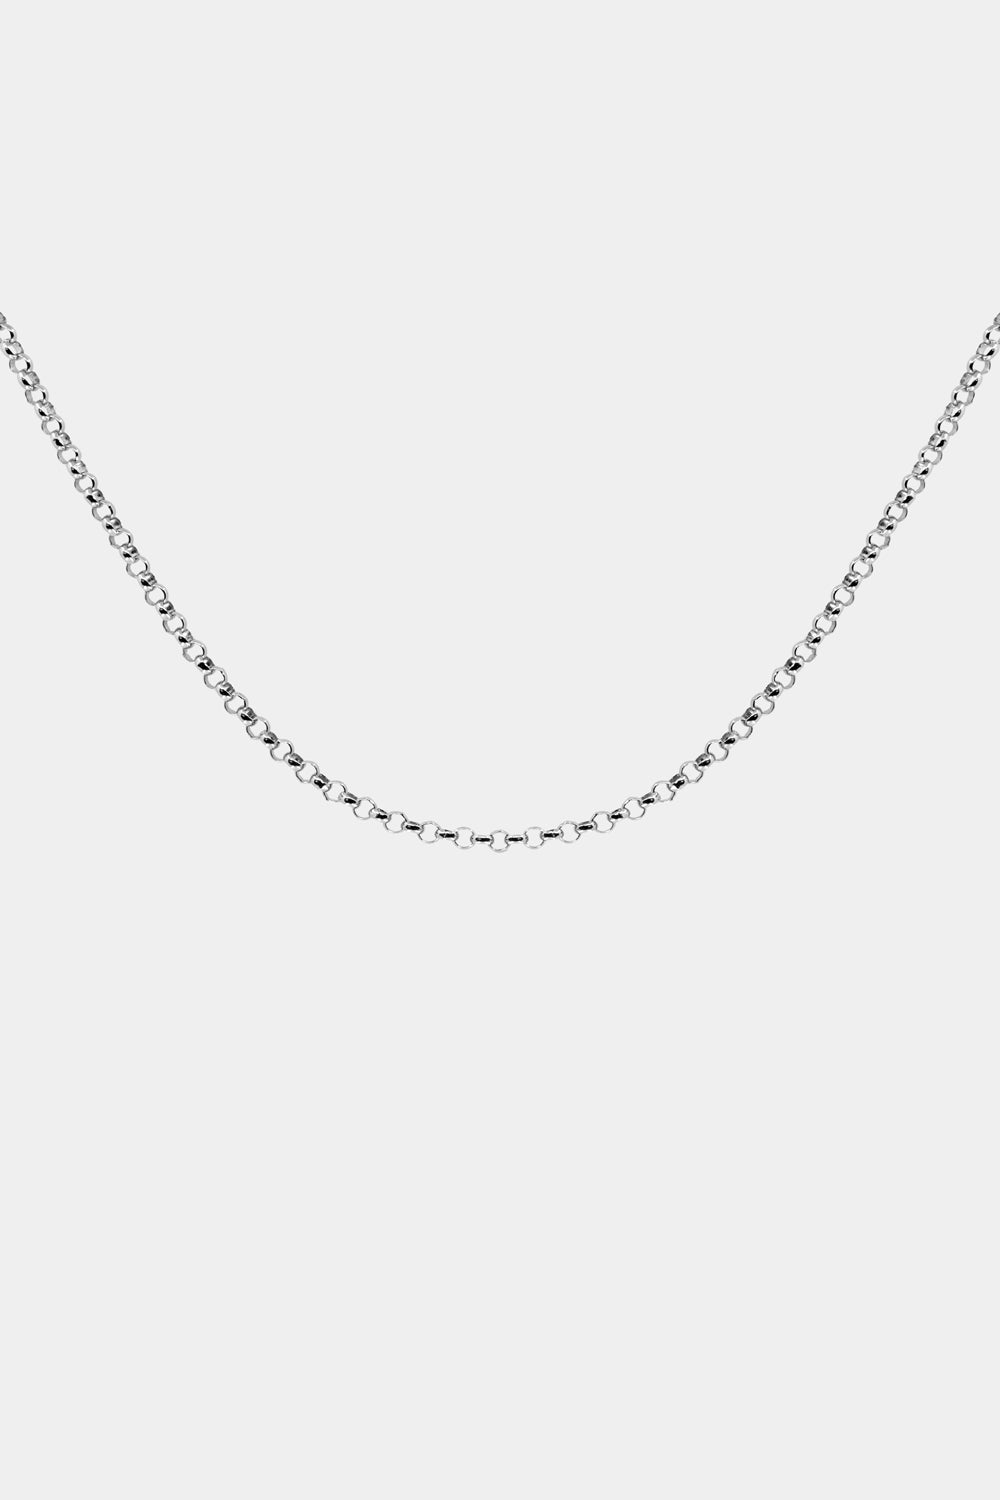 Small Chateau Necklace | 9K White Gold